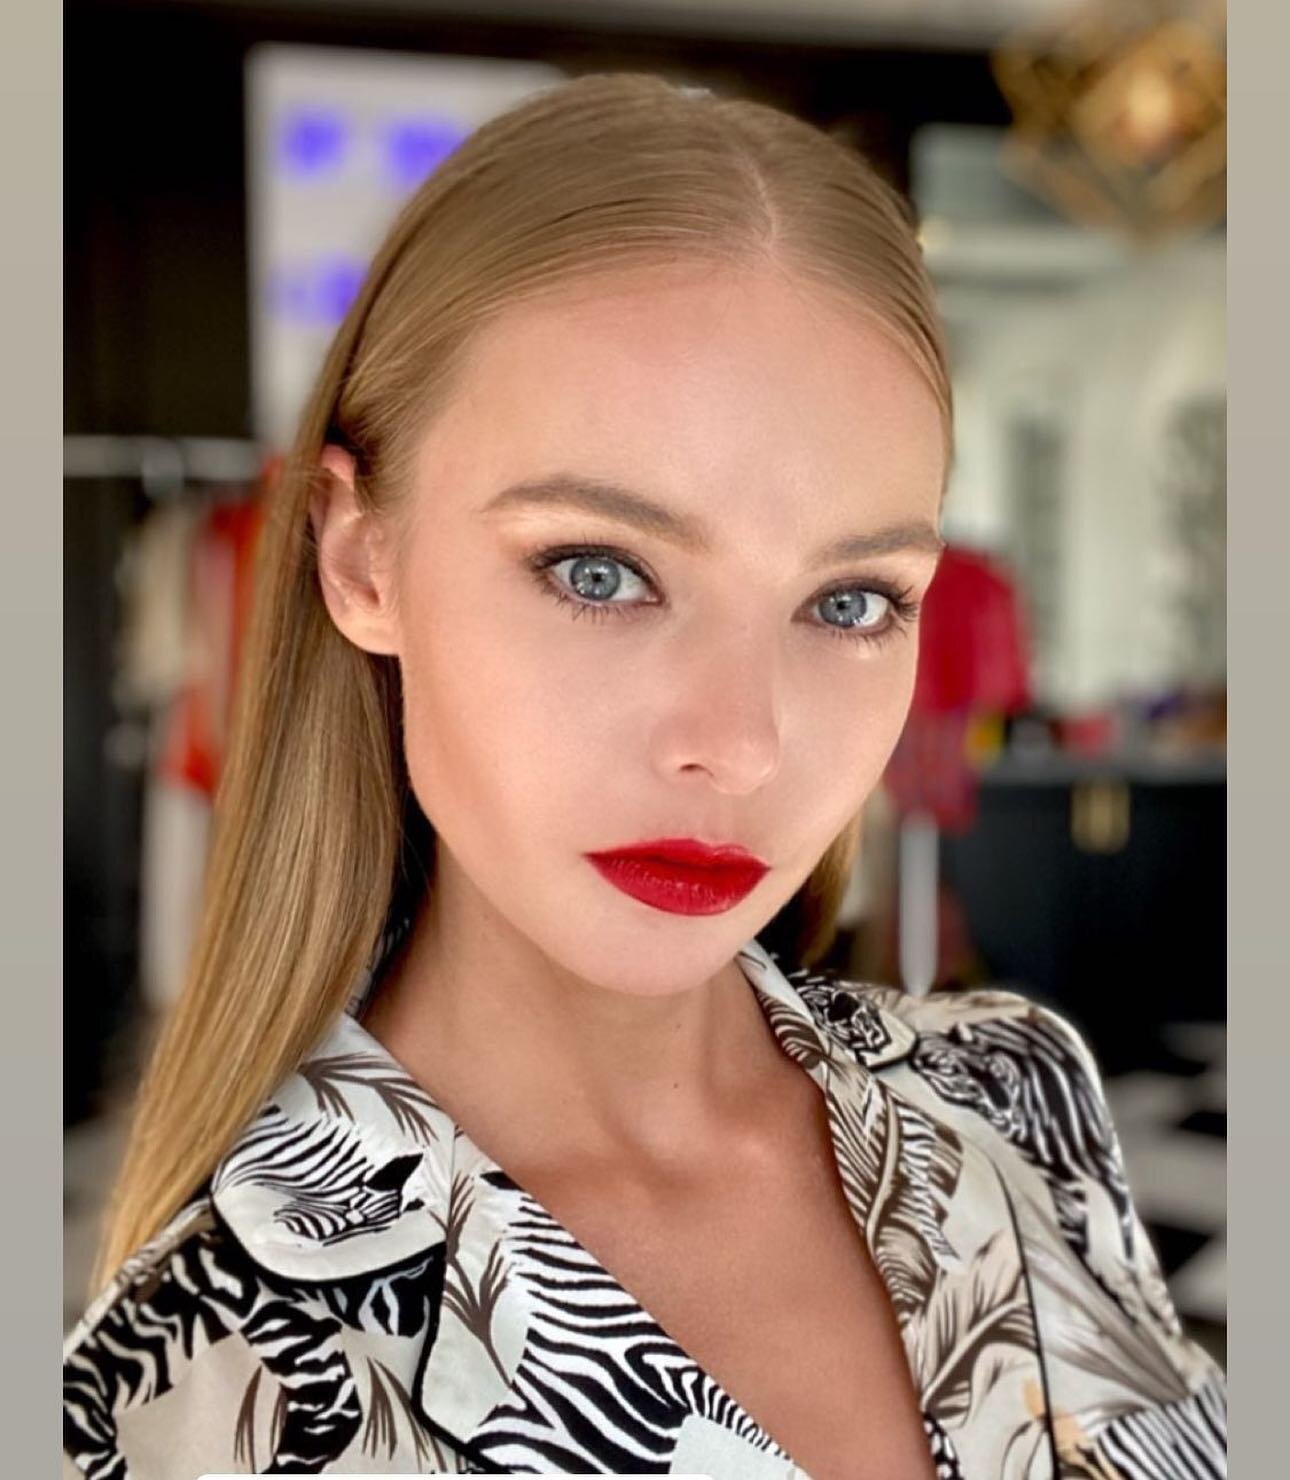 Red lips mood 💄 with @wondersveta makeup look created for Shahida Parides clothing brand...more details and pics from photoshoot are coming soon⚡️✨🌟📸

.
.
.

.
.
.
.
.
.

Makeup/hair: @natalikmua

.
.
.
.
.
.

#redlips #photoshoot #onset #setlife 